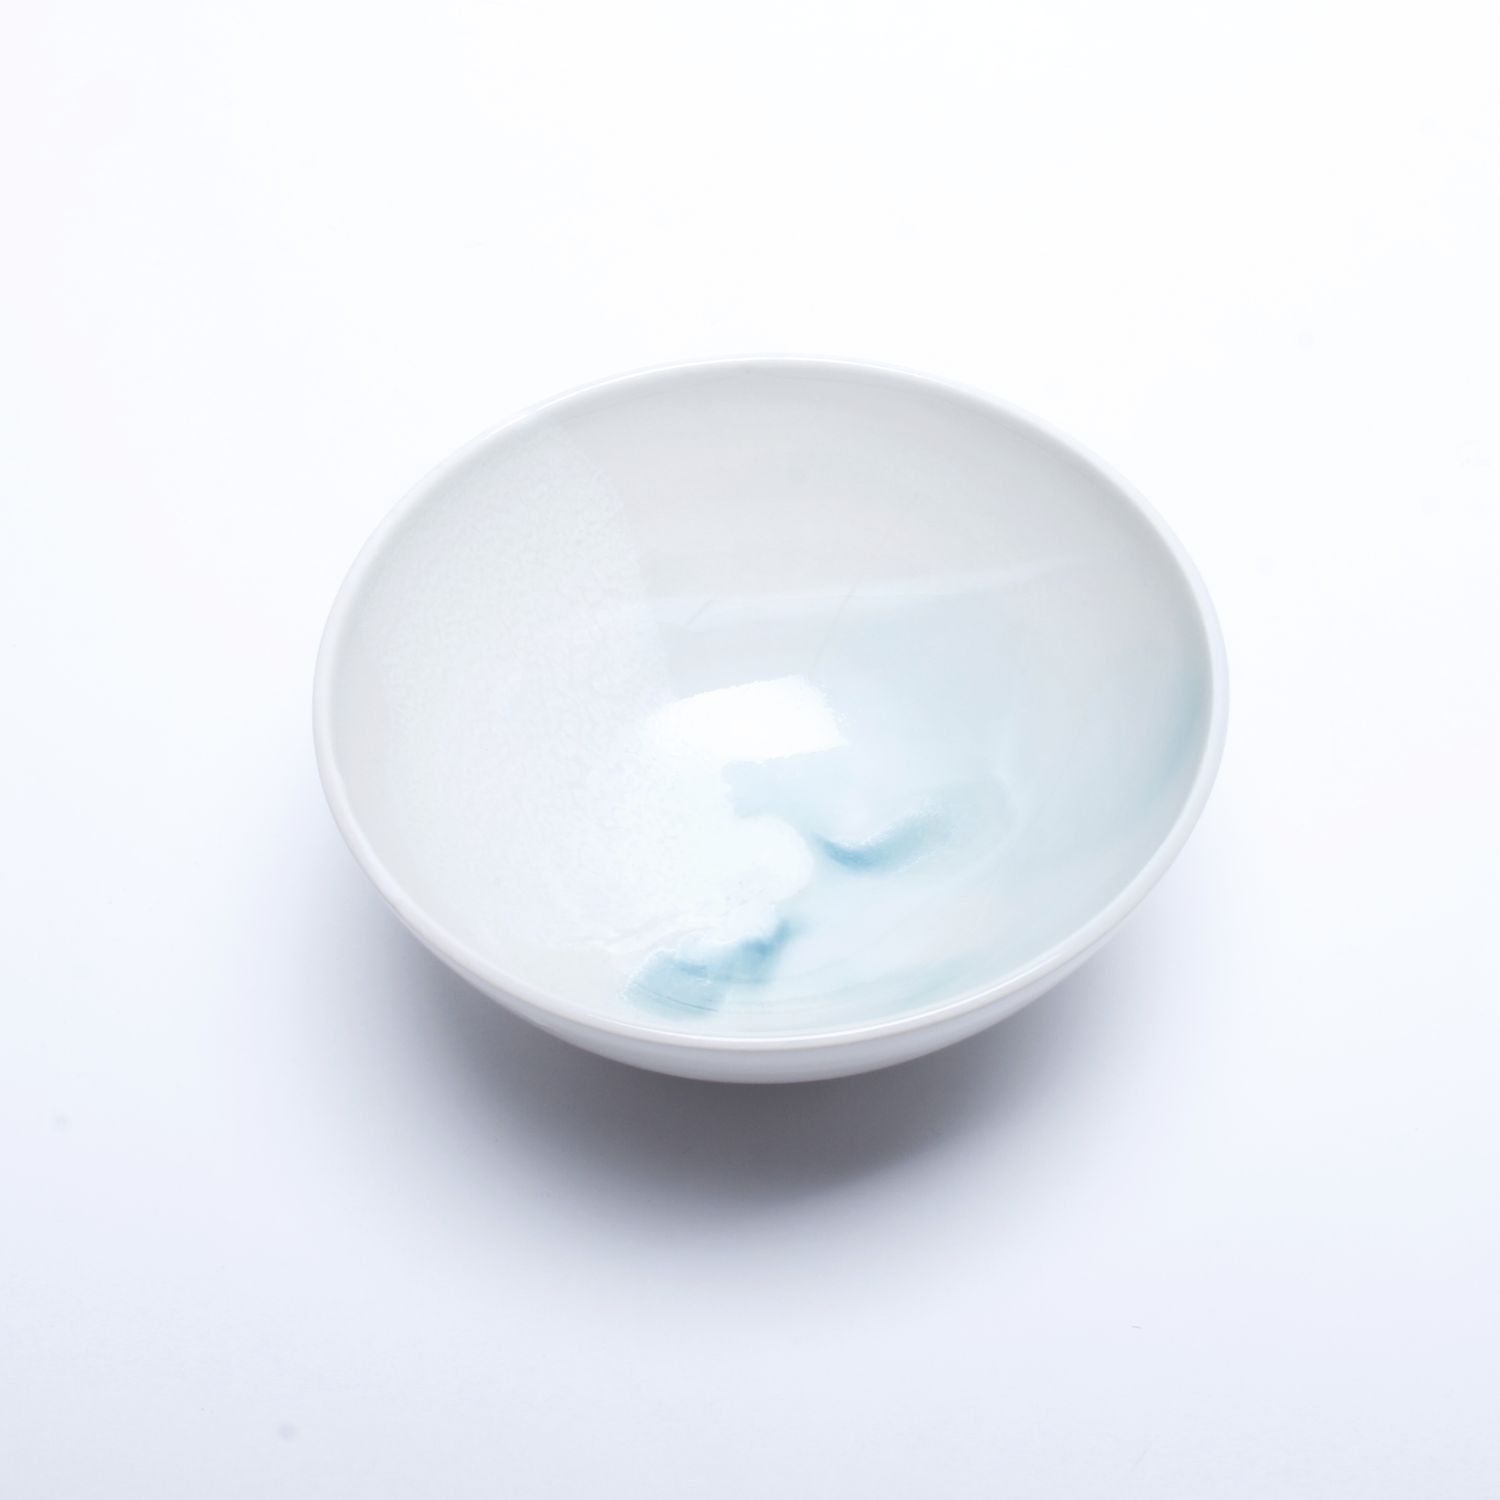 Jane Wilson: Small Bowl Product Image 1 of 4